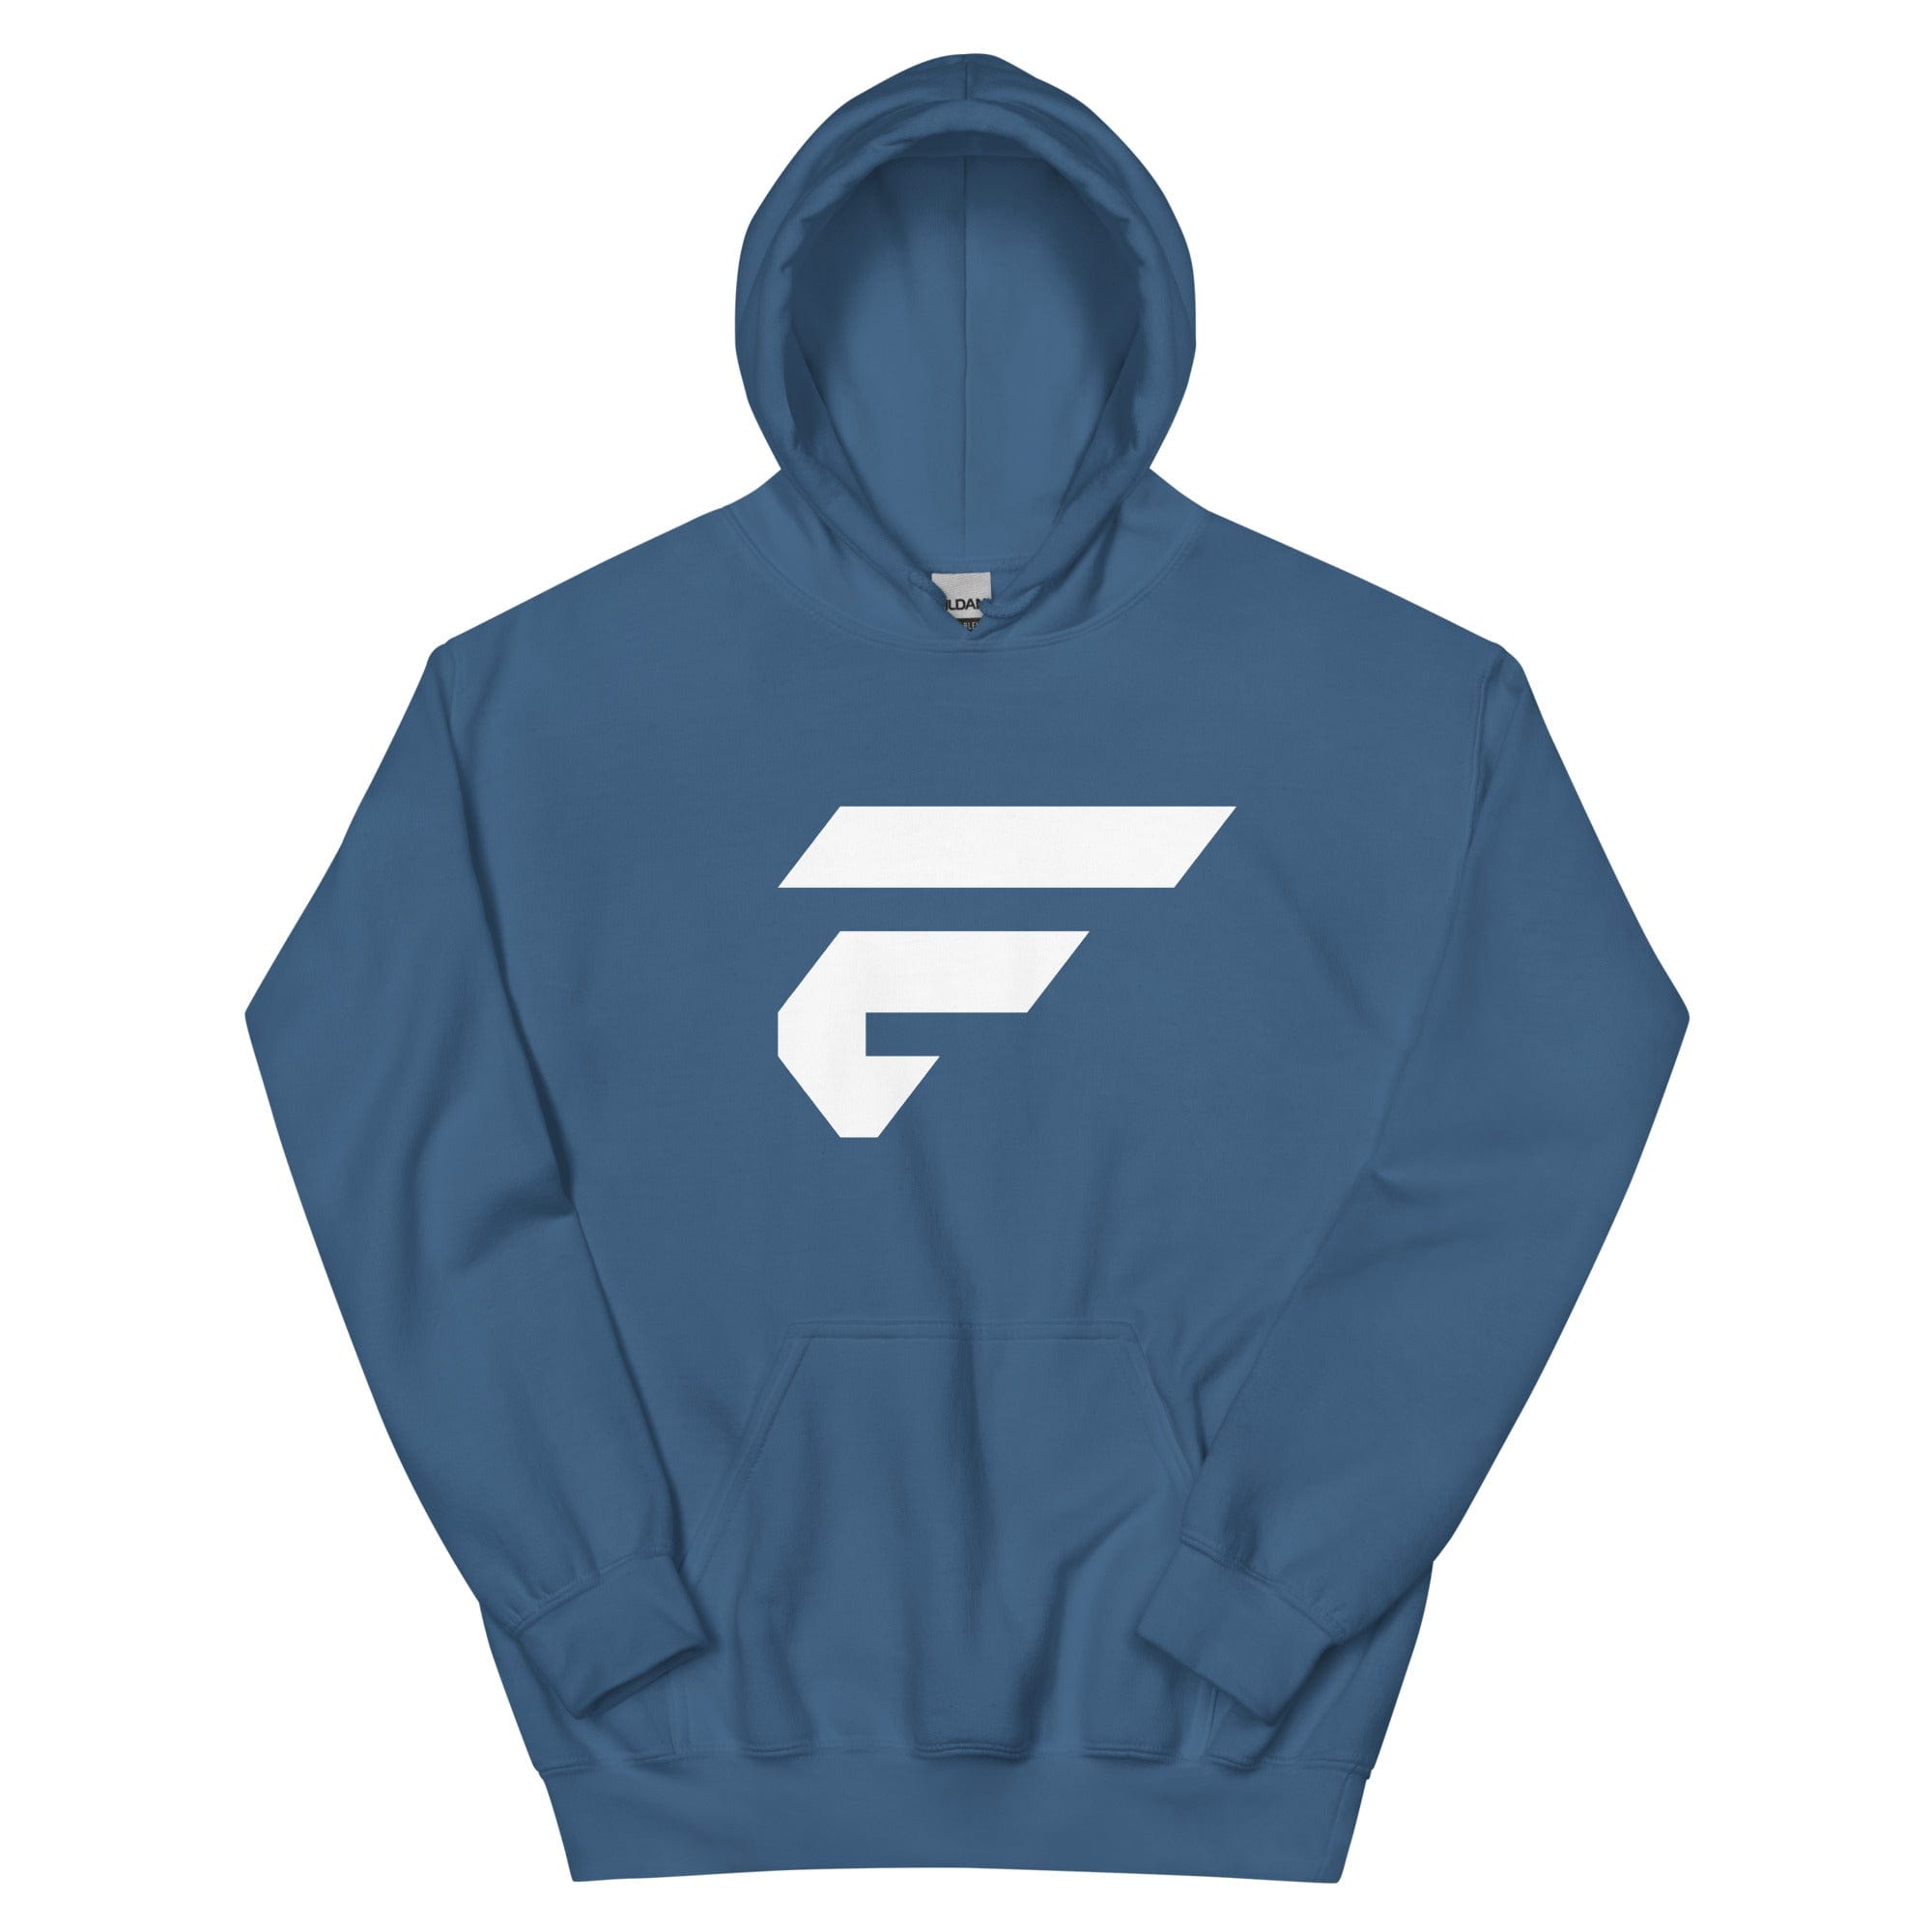 Teal unisex cotton hoodie with Fire Cornhole F logo in white